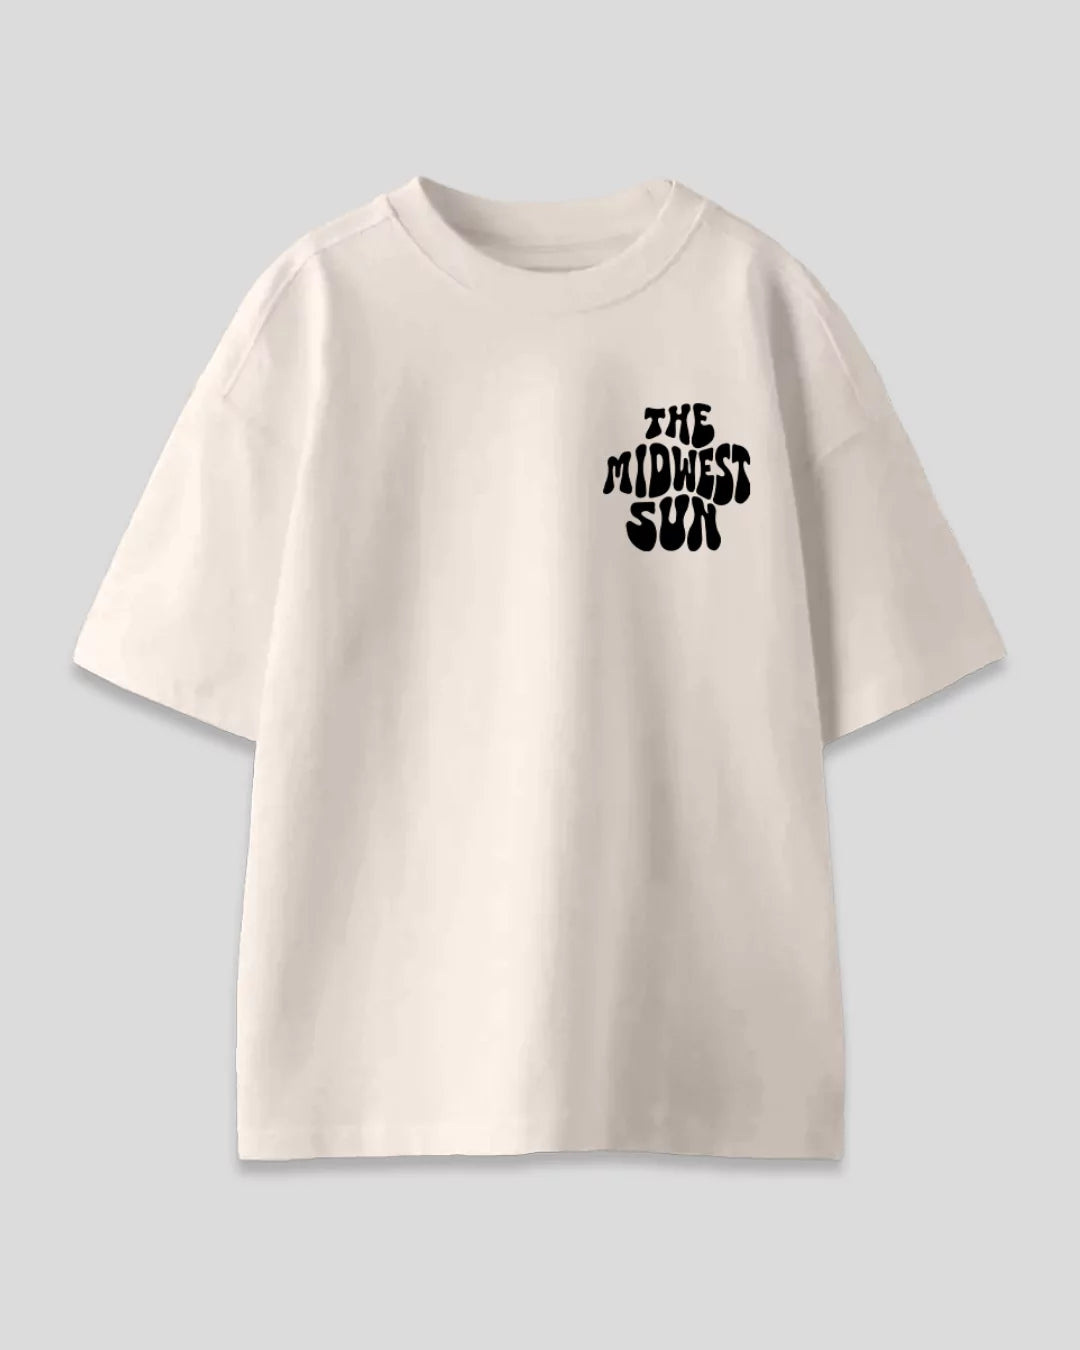 The Midwest Sun Oversized T-Shirt